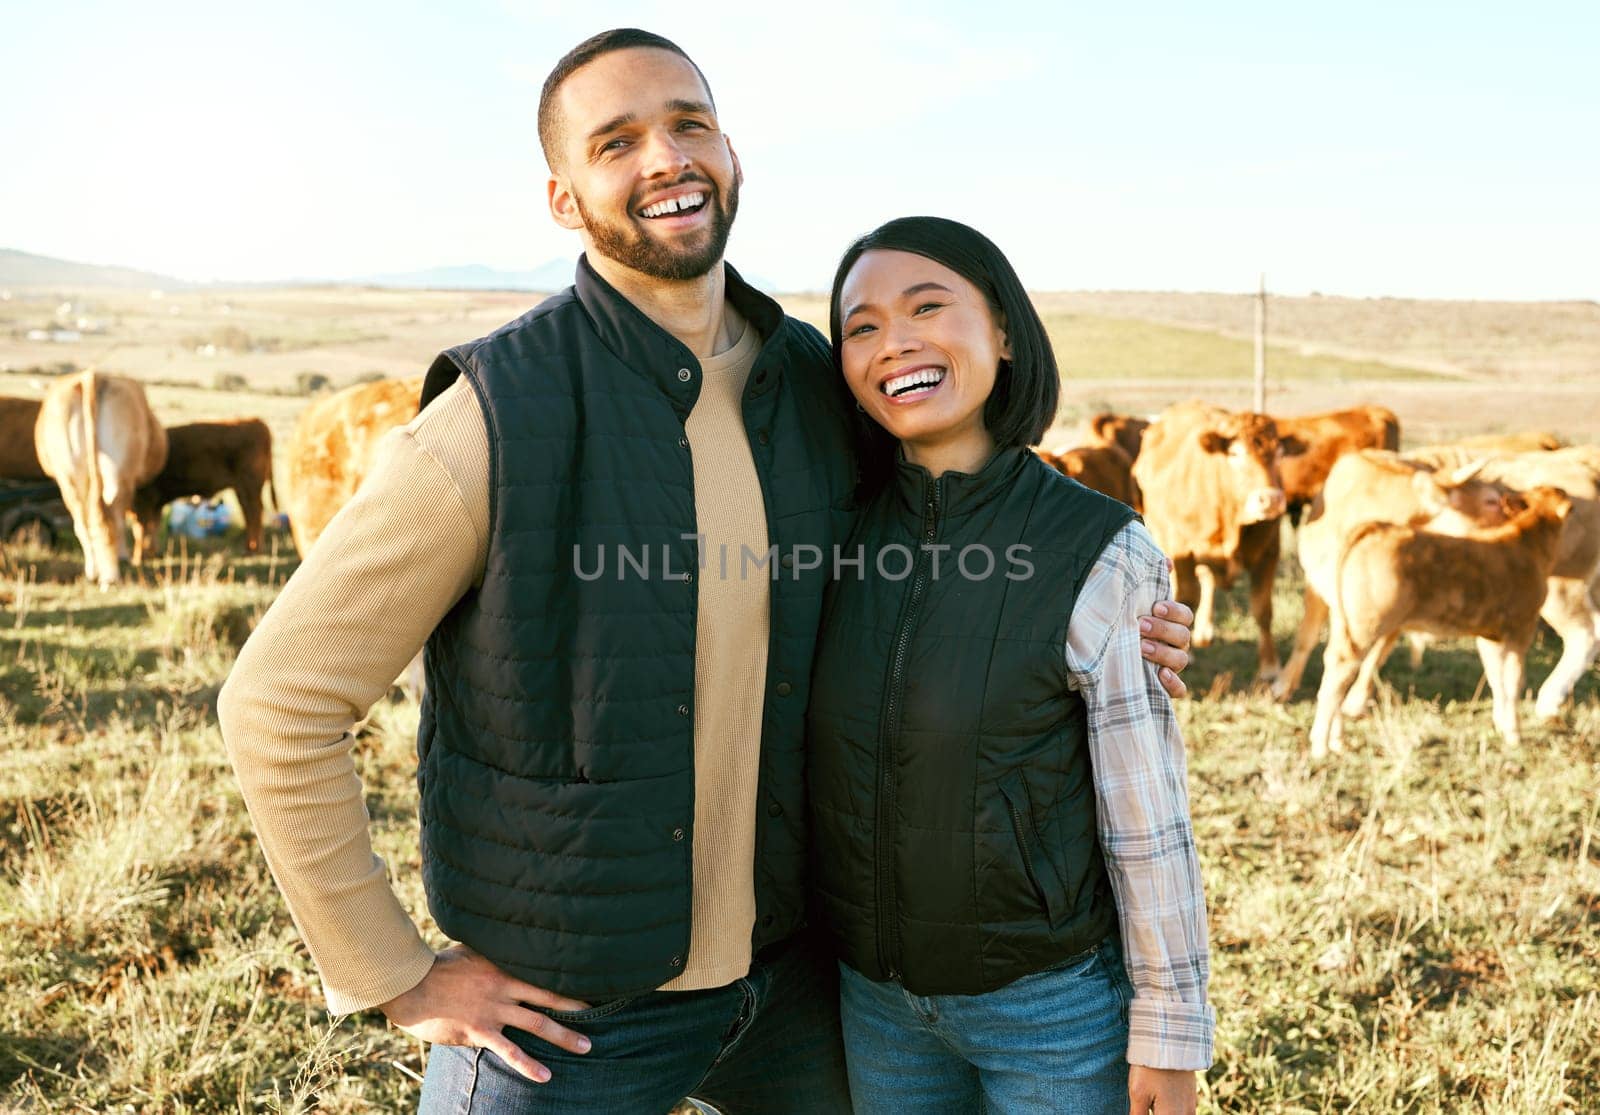 Portrait, farm and couple on cattle farm, smile and happy for farming success, agro and agriculture. Farmer, man and woman hug on grass field with livestock, excited for sustainability business.